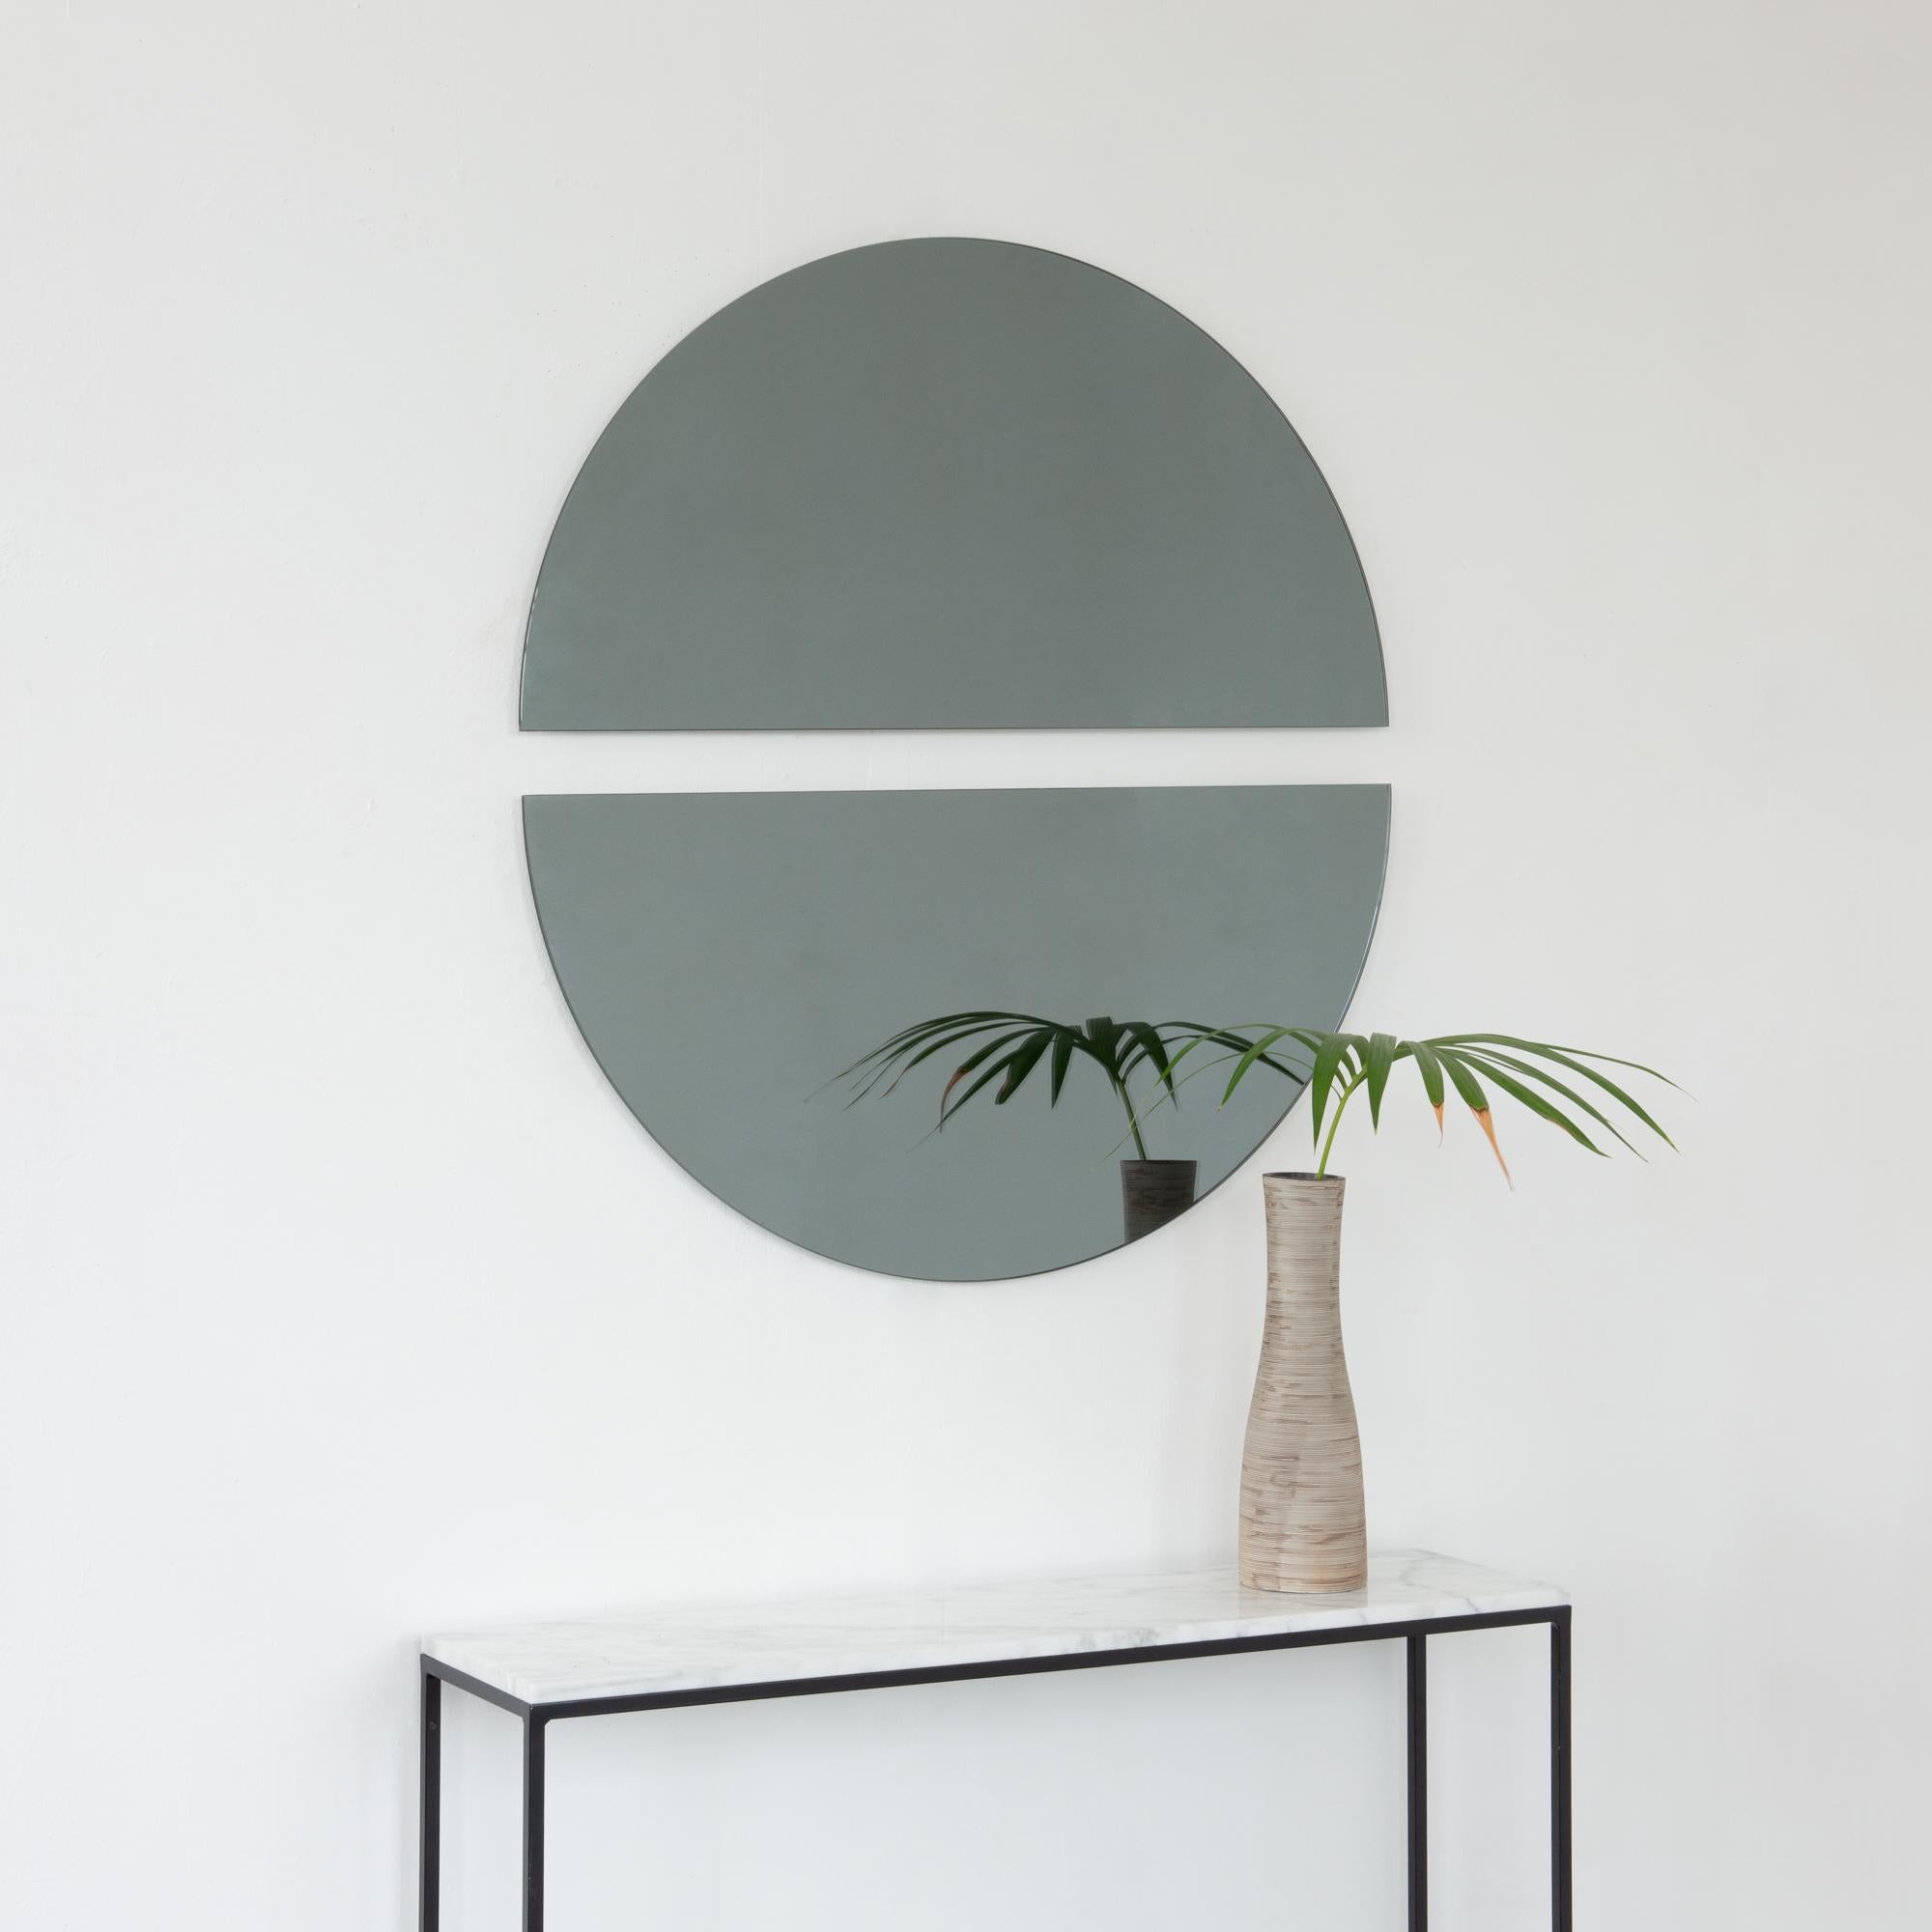 Set of two minimalist half-moon Luna™ black tinted frameless mirrors with a floating effect. Fitted with a quality and ingenious hanging system for a flexible installation in 4 different directions. Designed and made in London, UK. 

The backing has